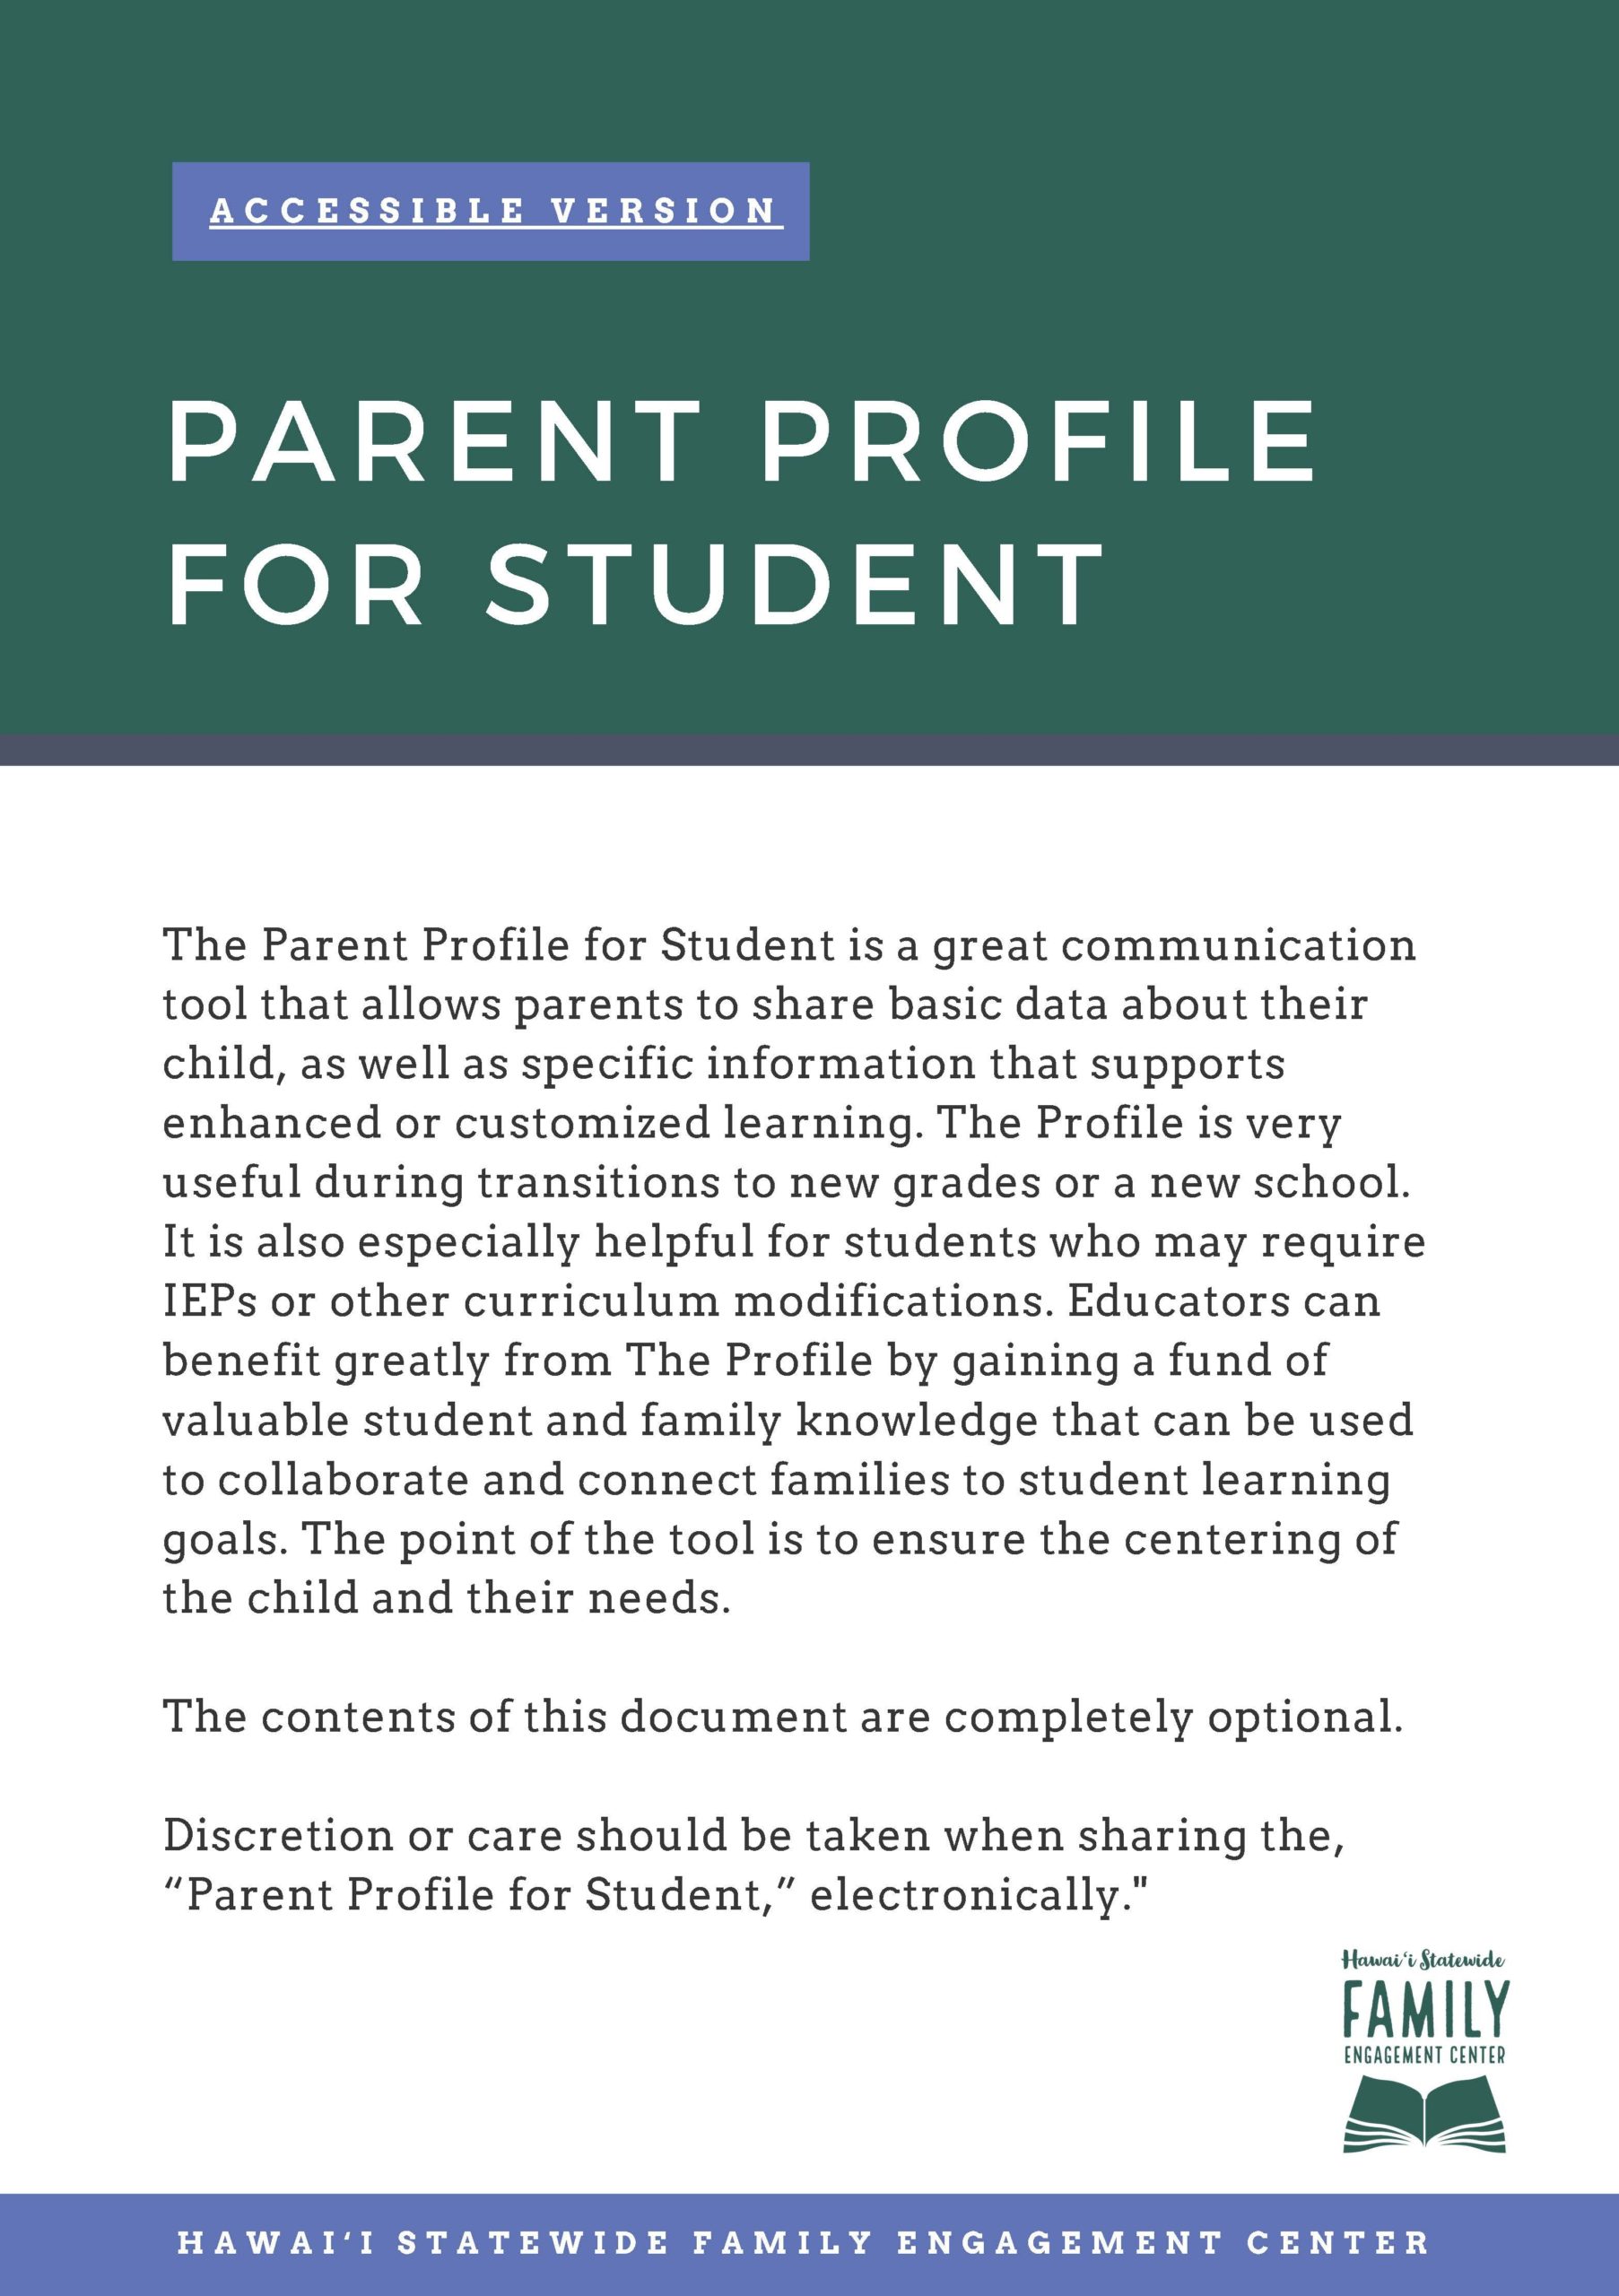 Cover Page of Parent Profile for Student